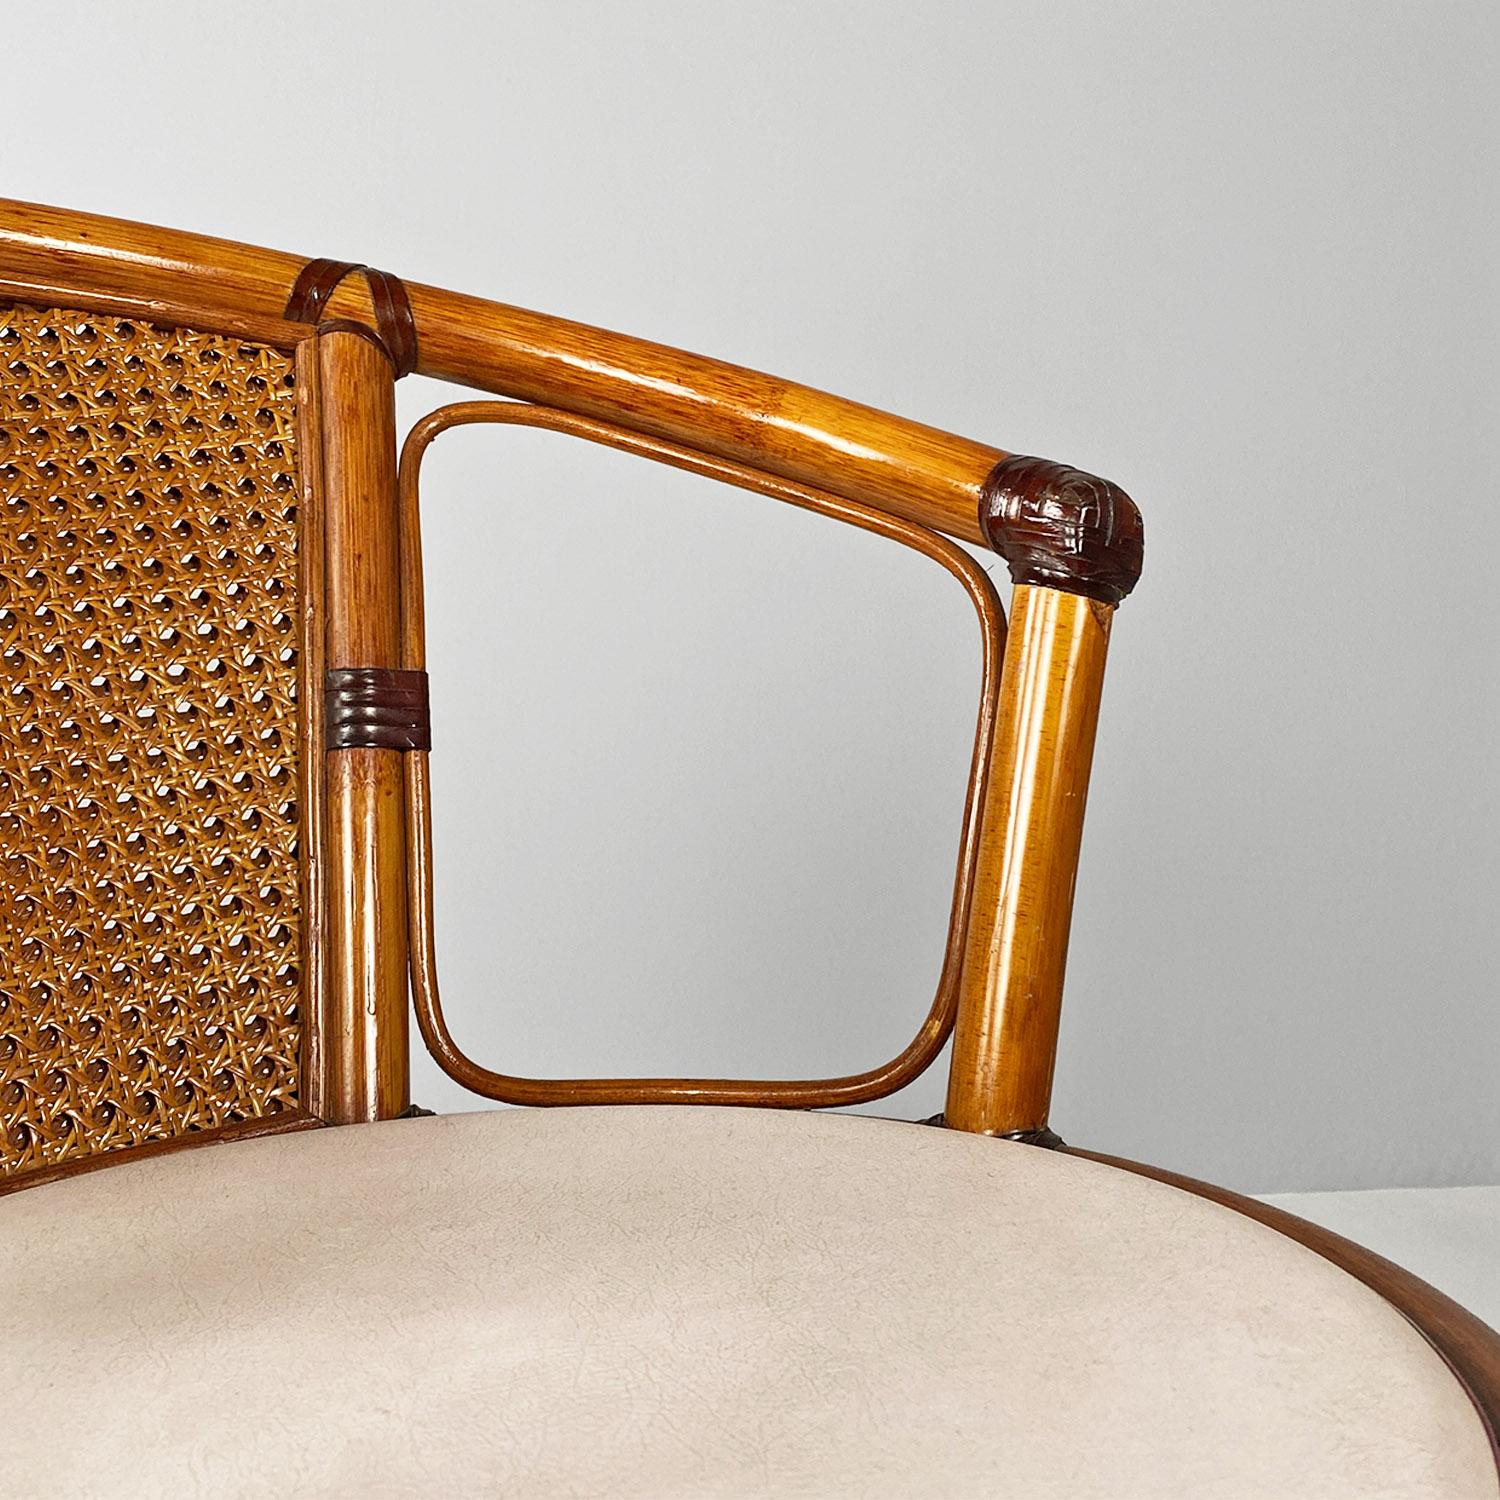 Cockpit chair, modern Italian, made of vienna straw wood and steel, ca 1970s For Sale 3